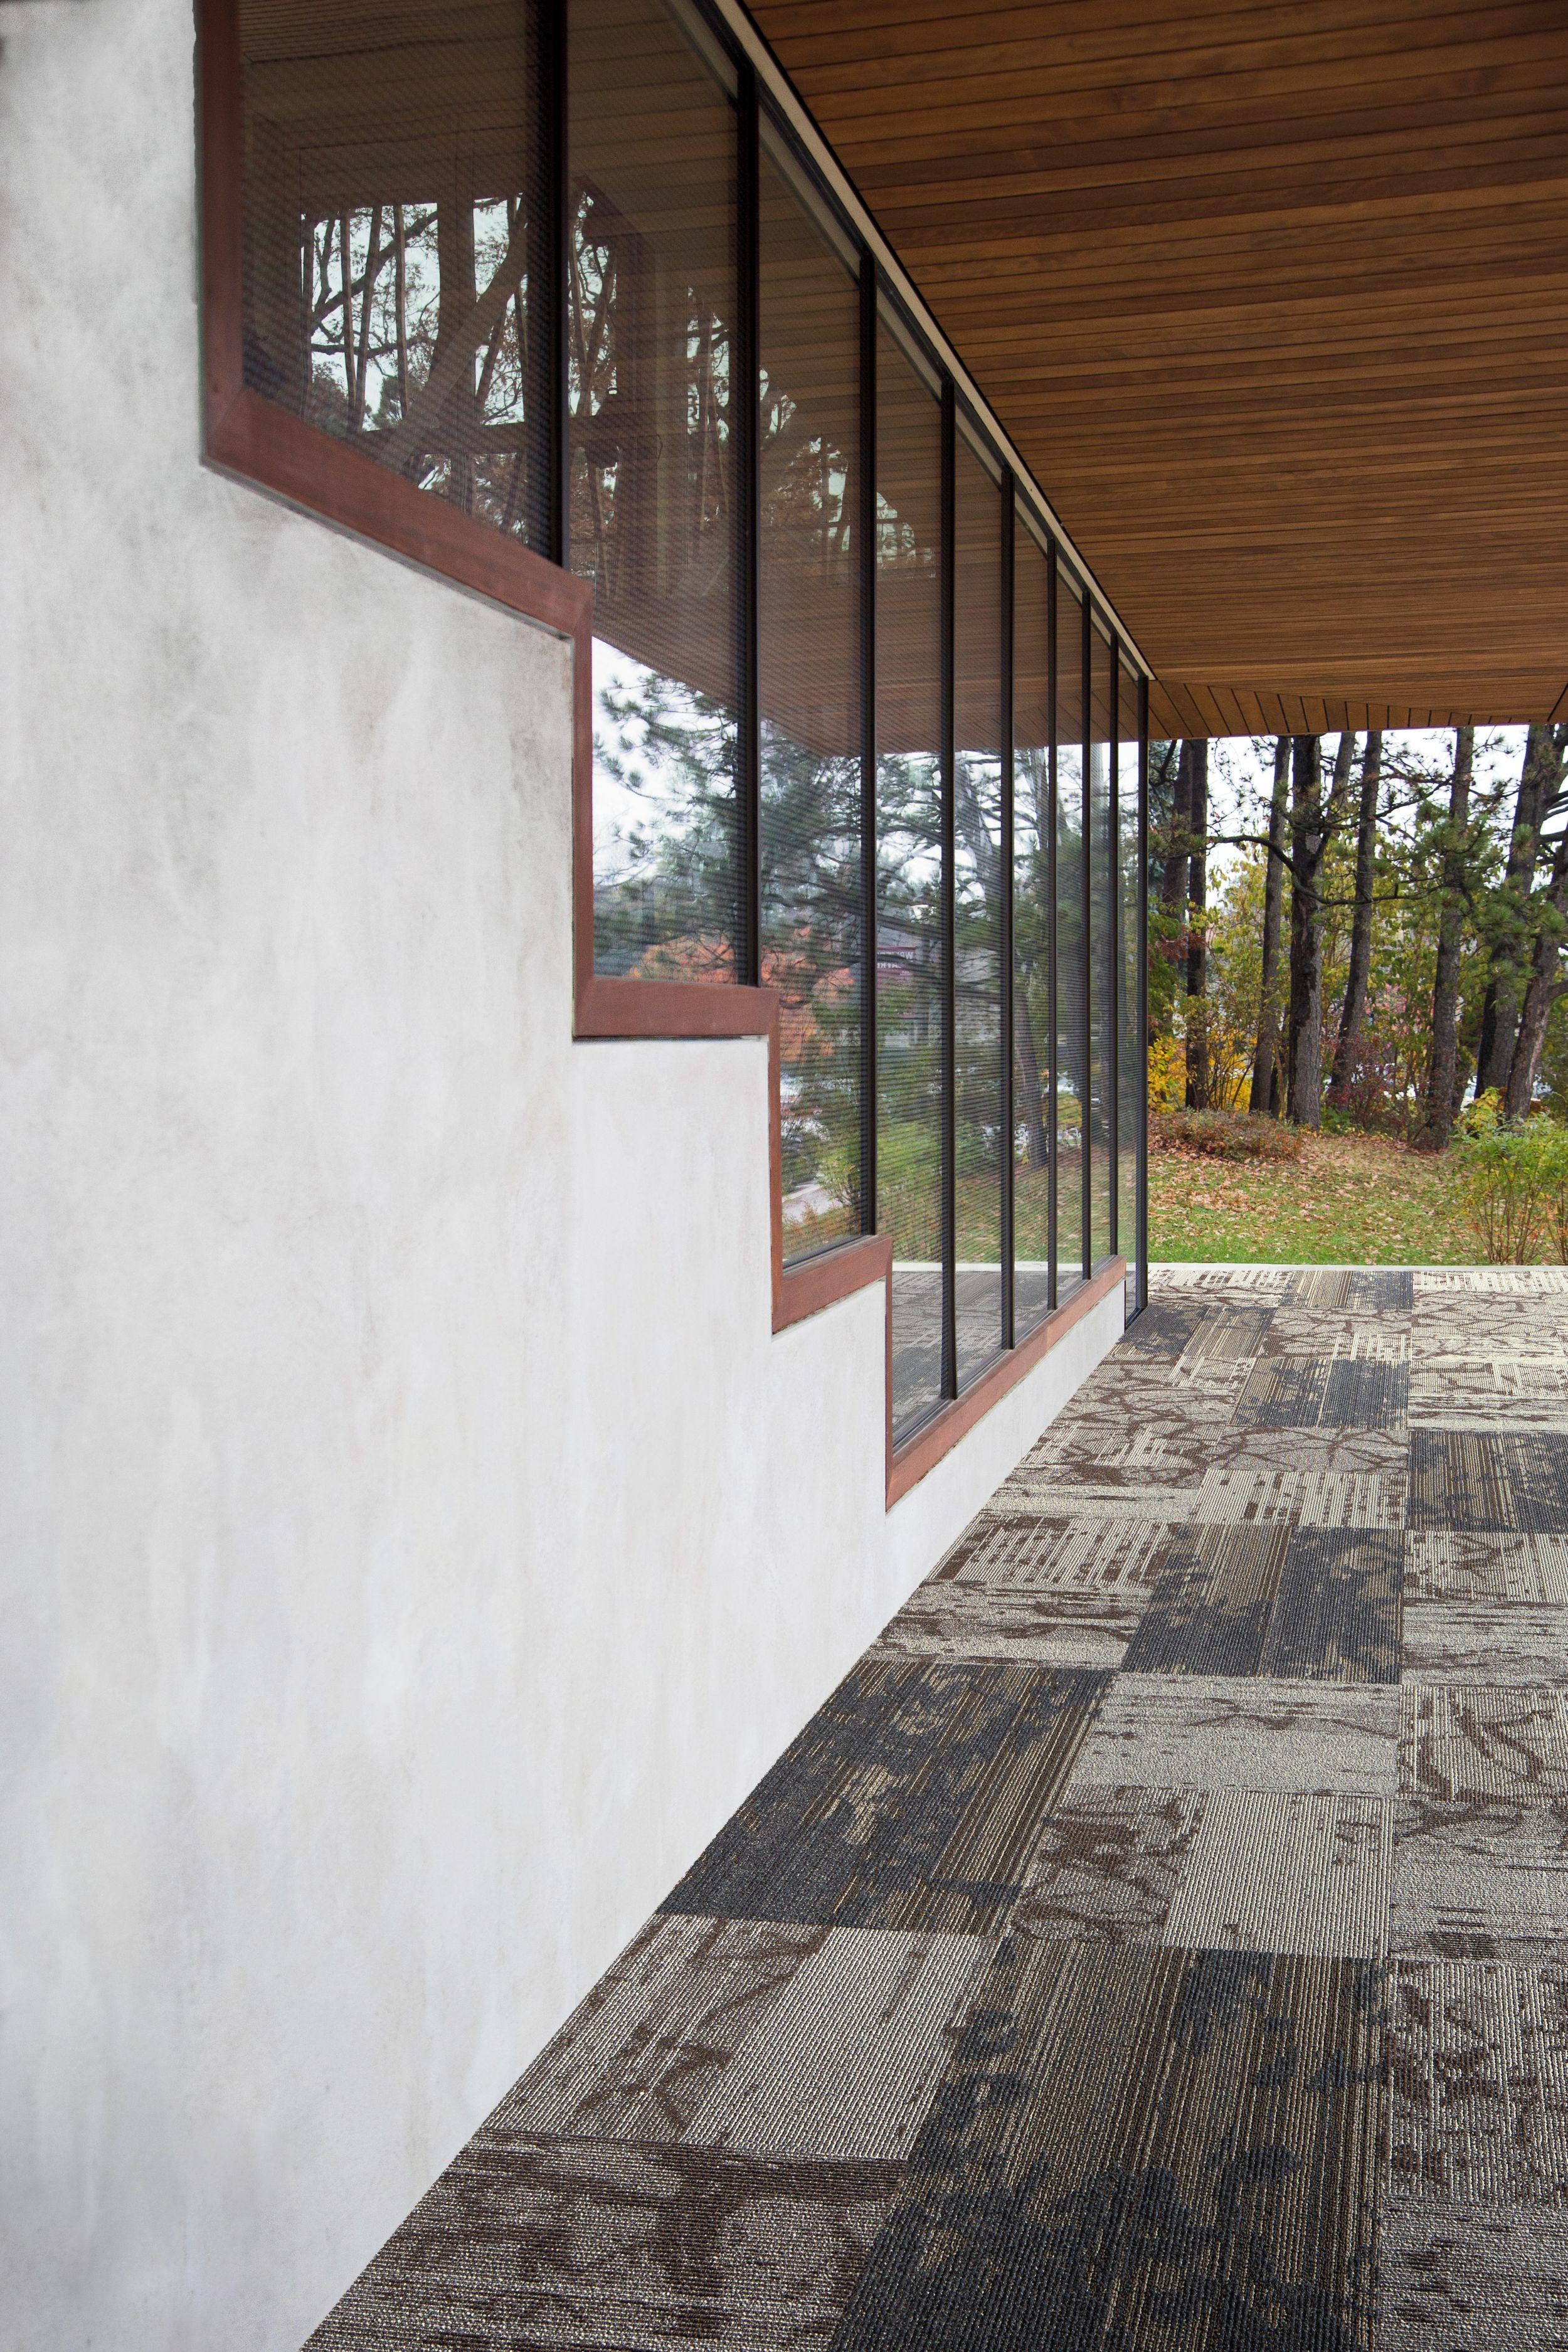 Interface Glazing and Ground plank carpet tile shown for inspiration in outdoor setting imagen número 10